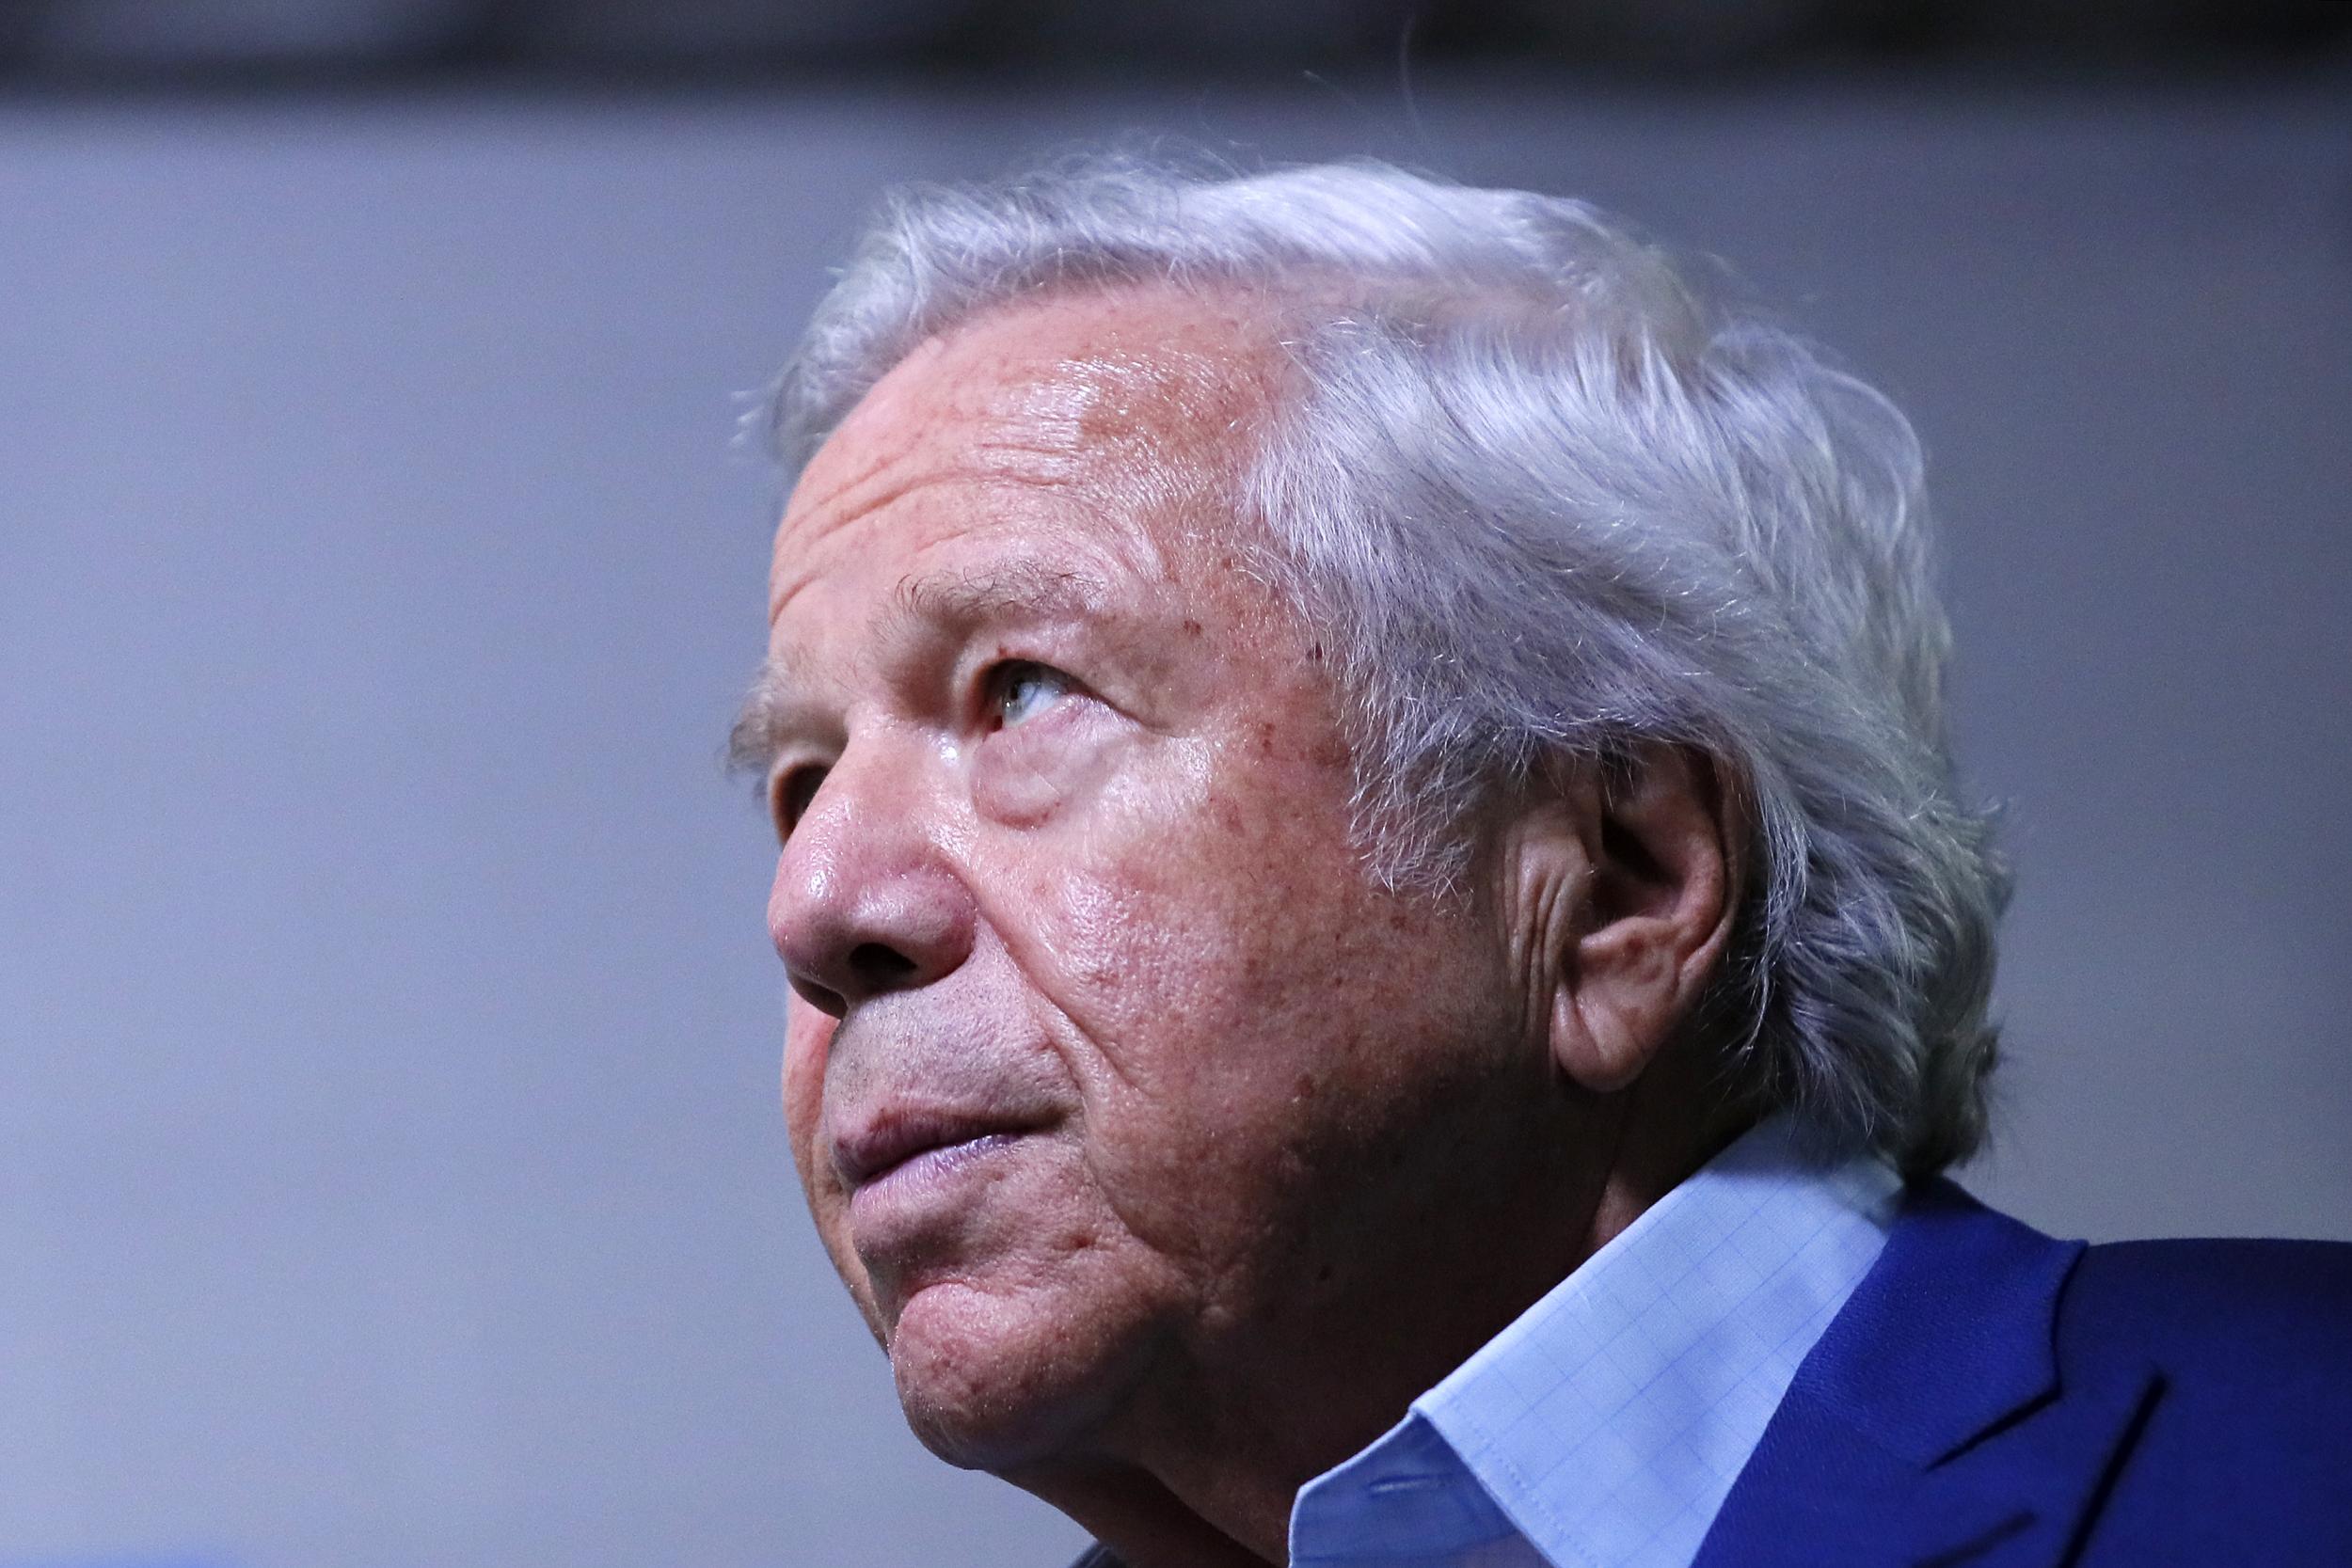 Robert Kraft: Prosecutors will release spa video of New England Patriots owner paying for sexual services